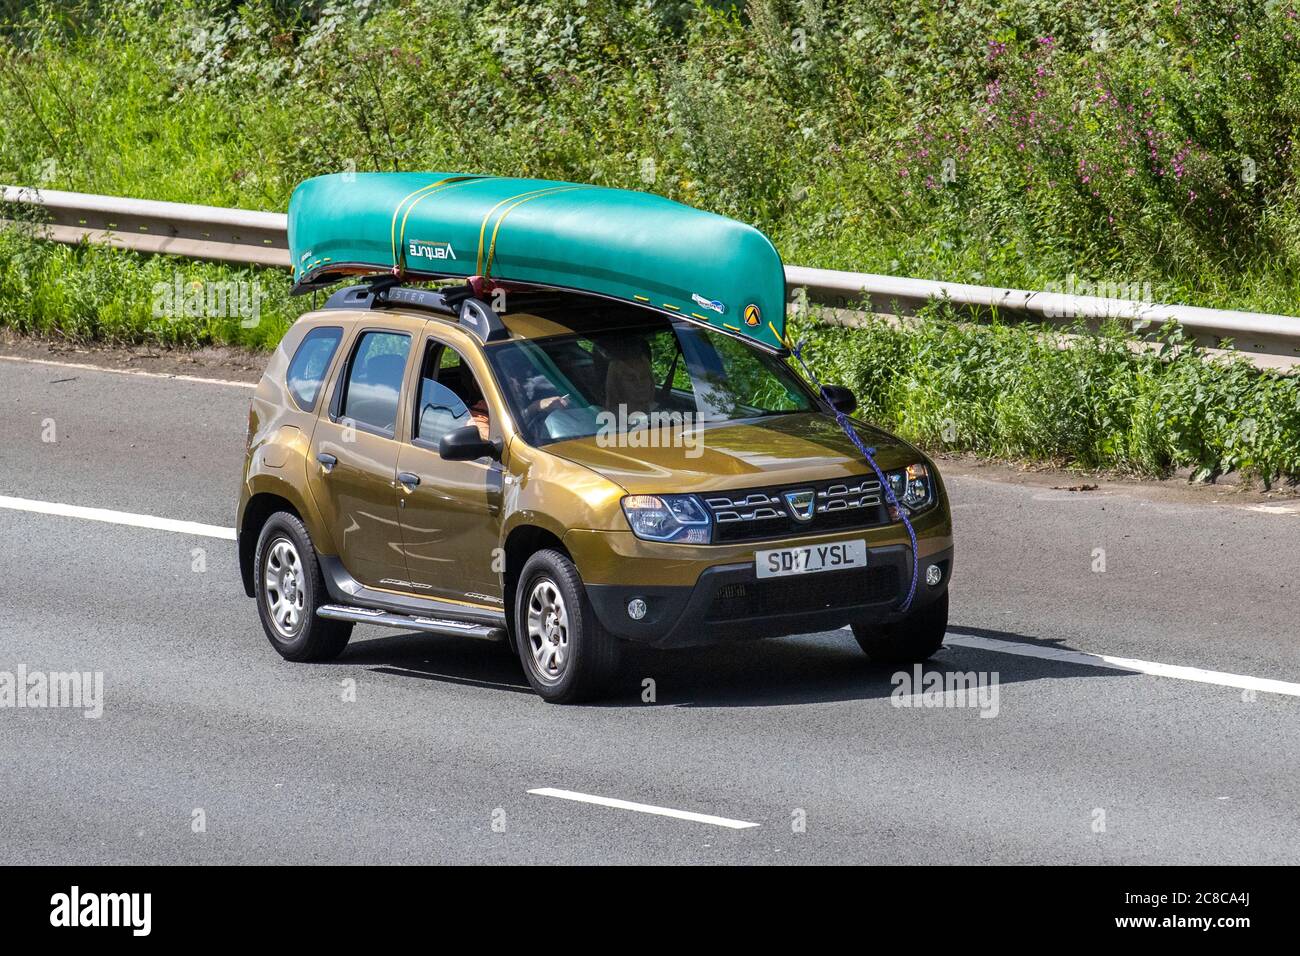 2017 bronze green Dacia Duster Ambiance DCI 4X2 1461cc diesel SUV carrying Venture canadian canoe; Vehicular traffic moving vehicles, cars driving vehicle on UK roads, motors, motoring on the M6 motorway highway network. Stock Photo